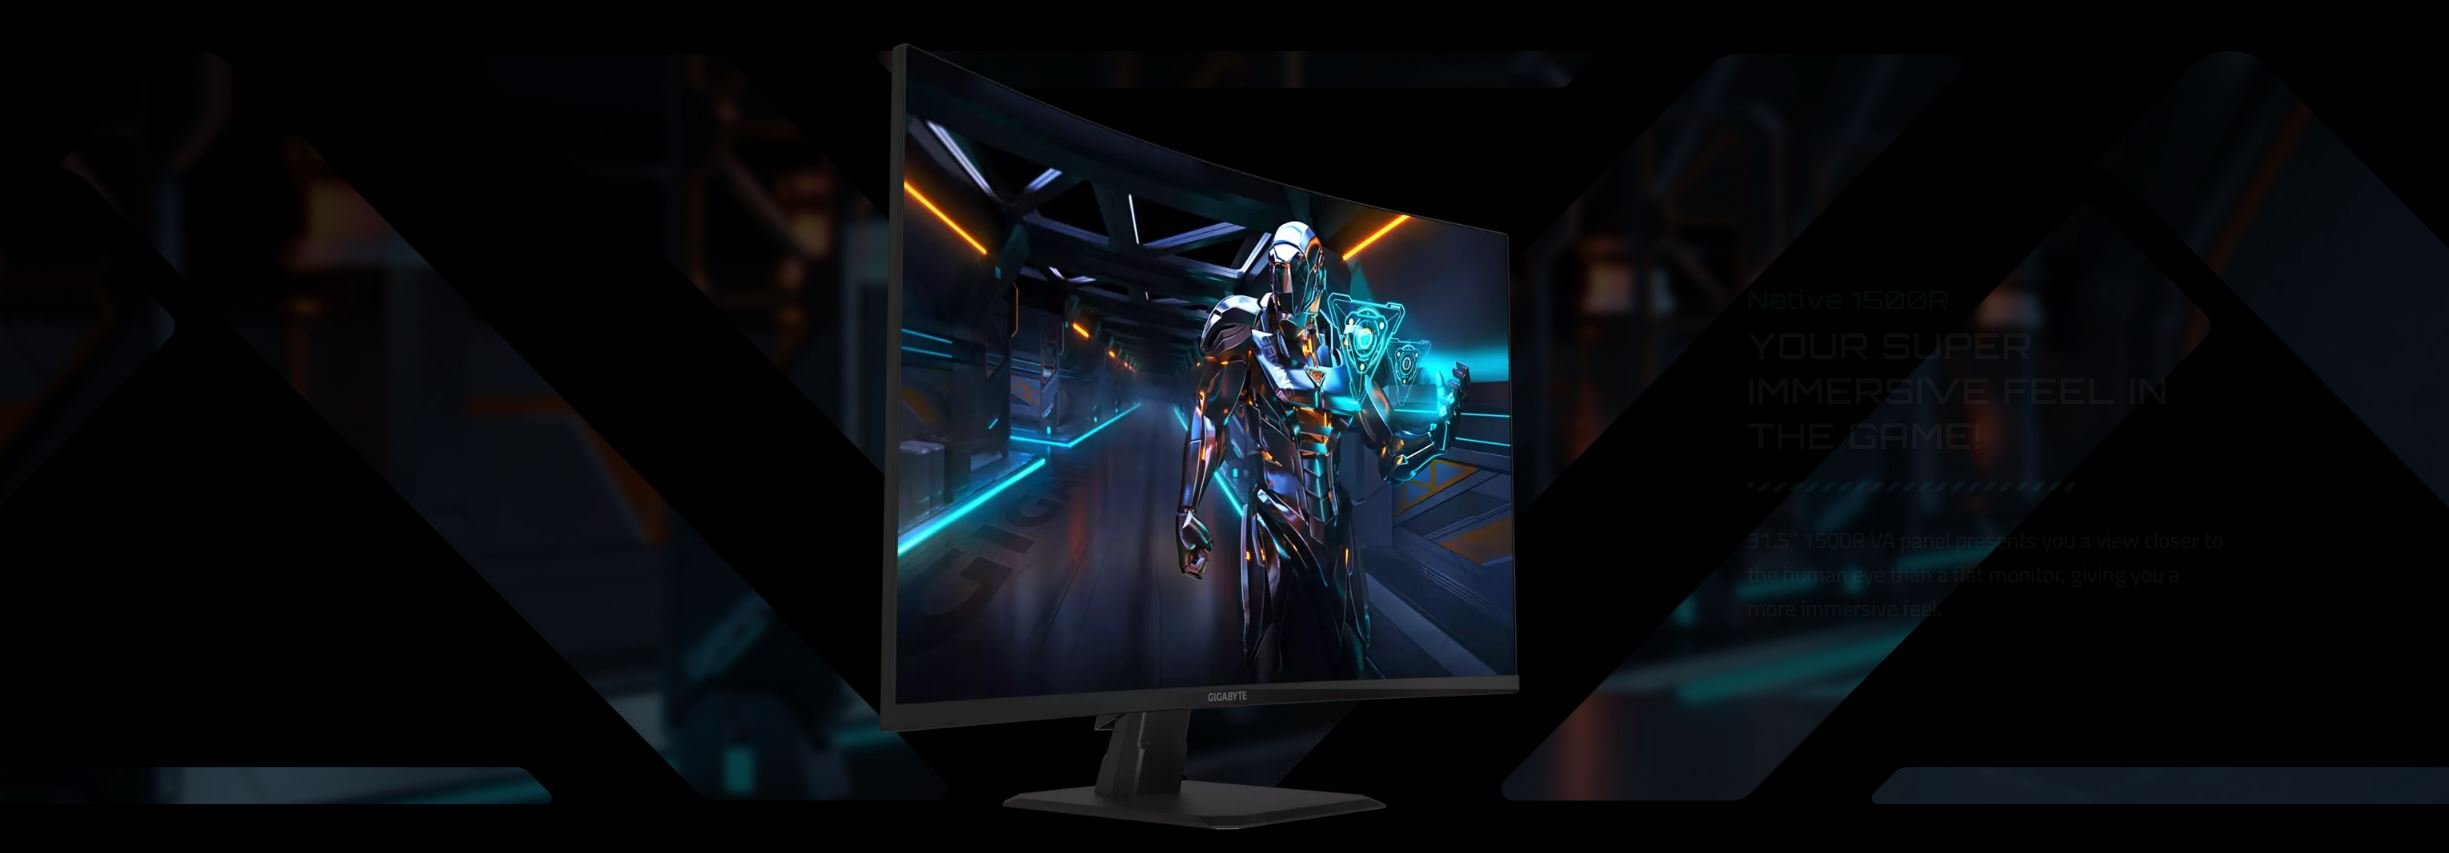 Gigabyte GS32QC 31.5 1440p 165 Hz Curved Gaming Monitor GS32QC